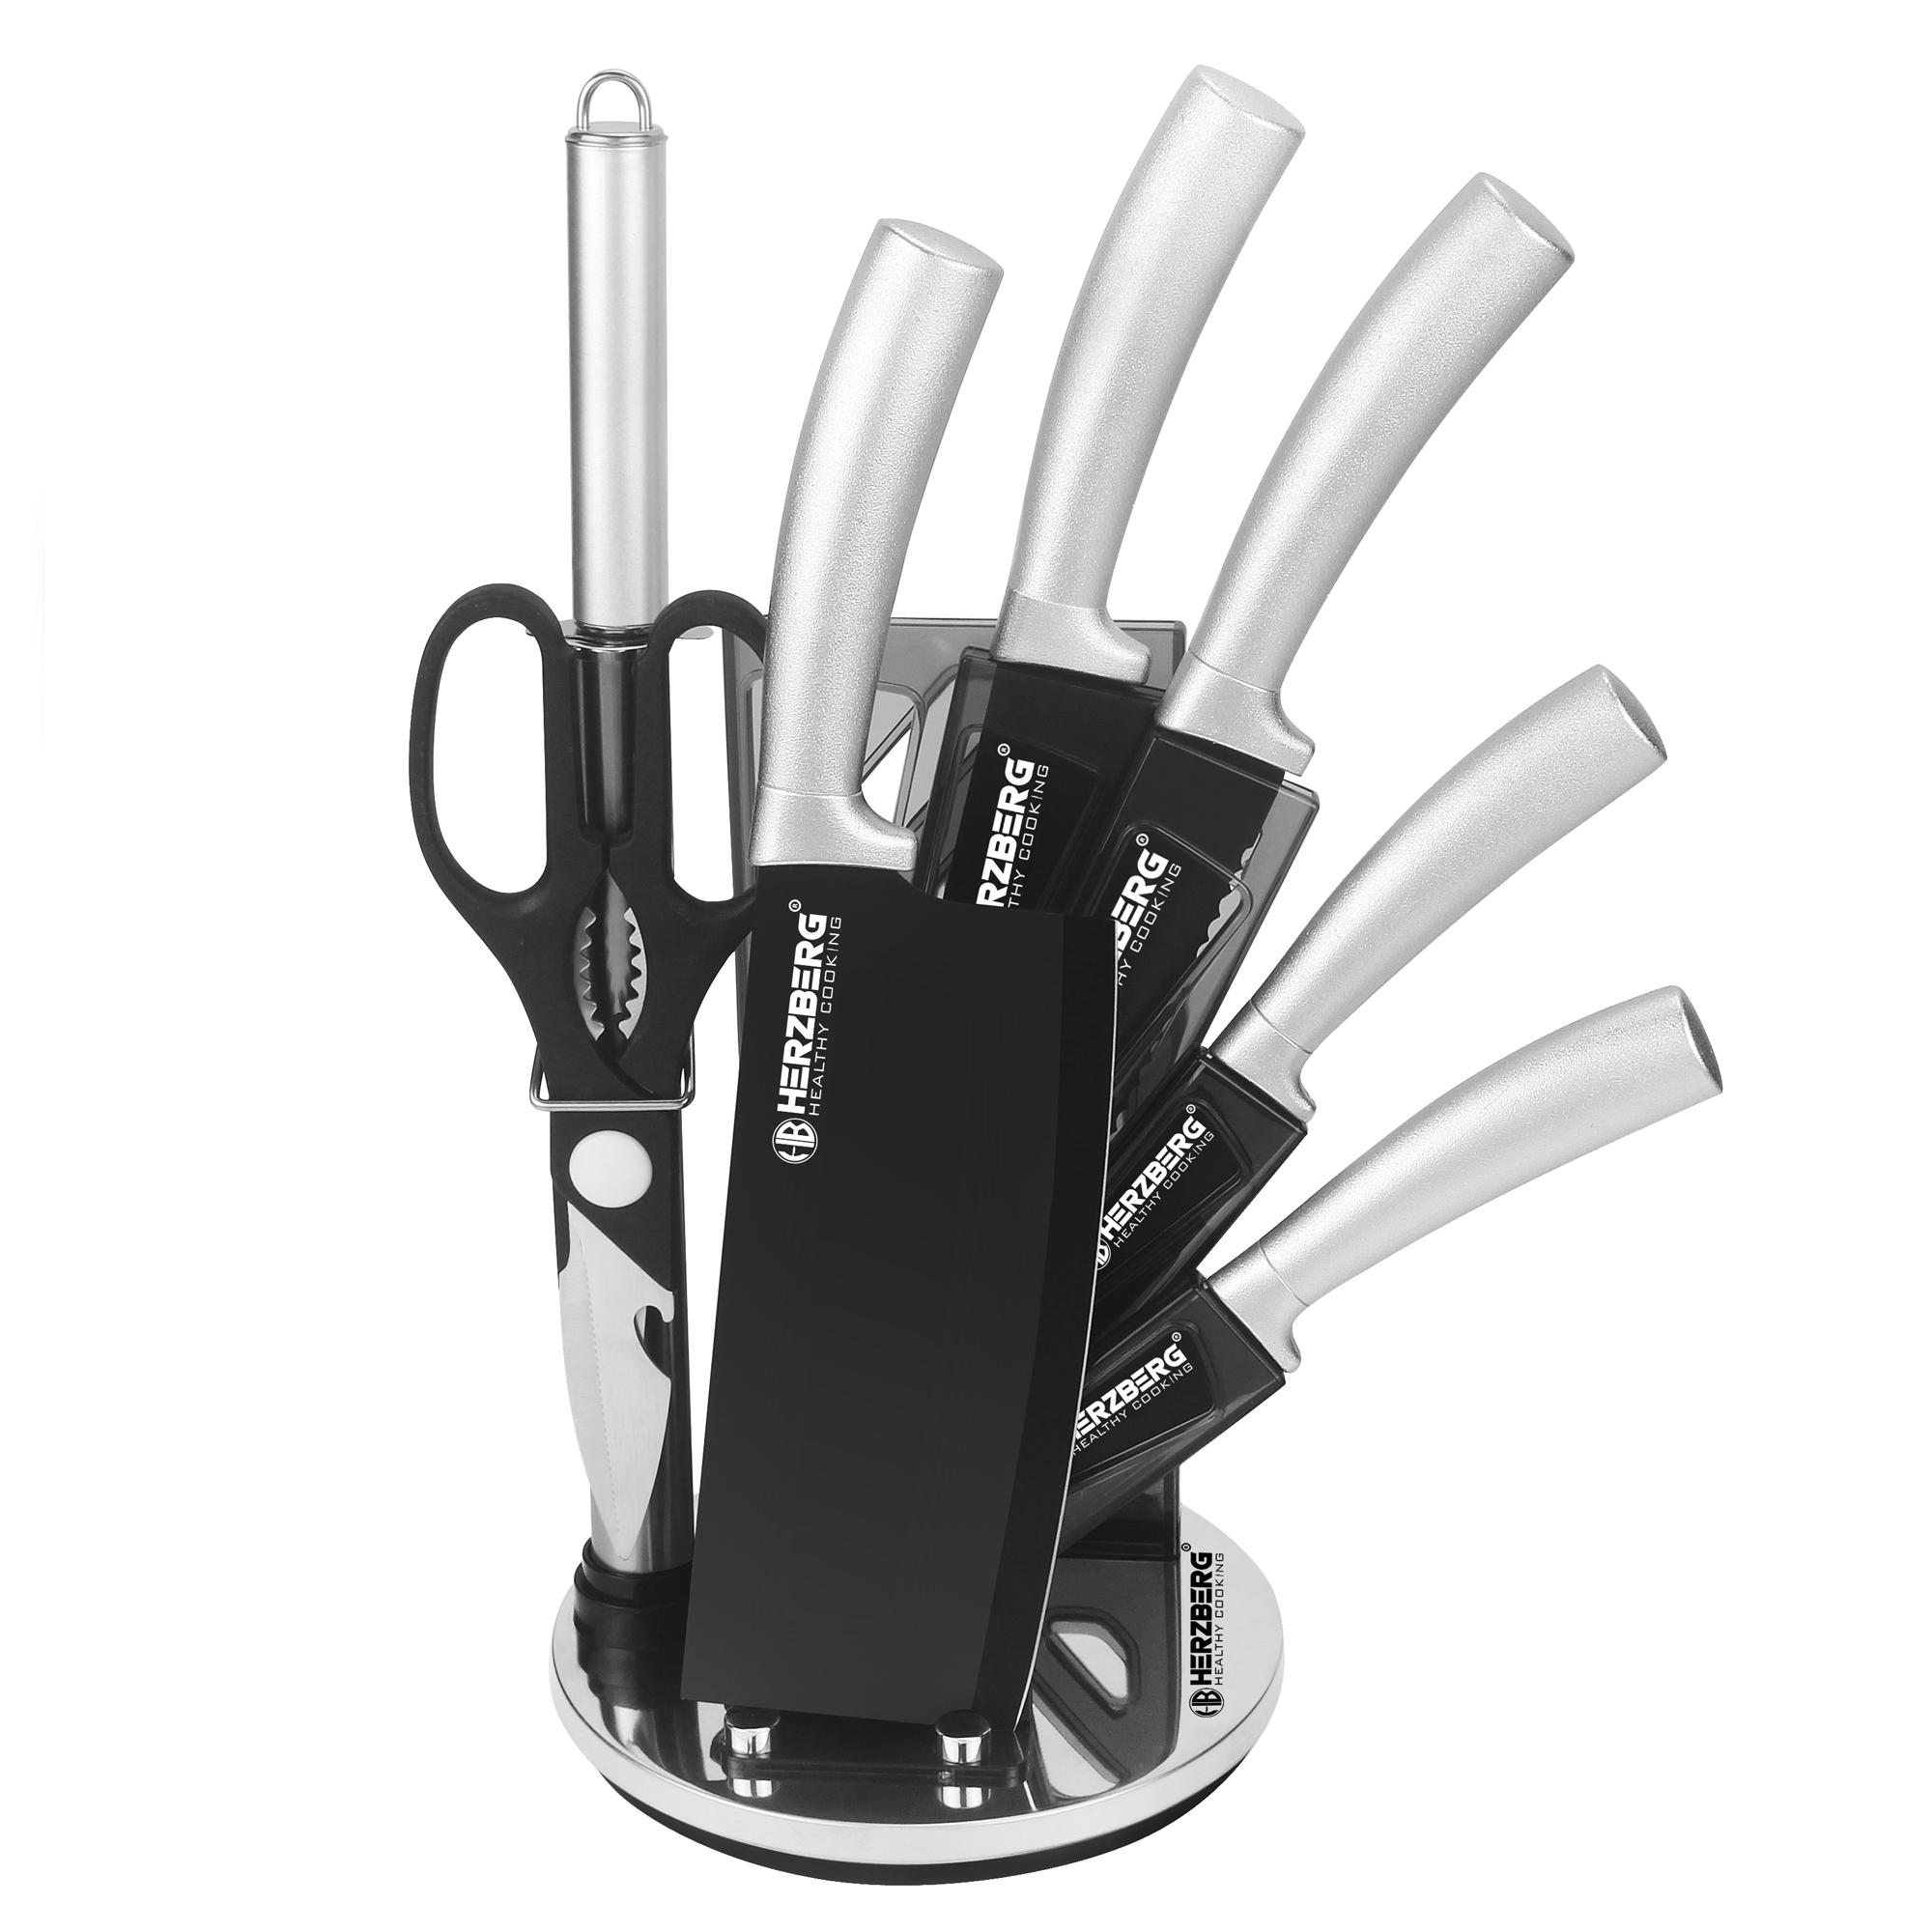 Herzberg 8 Pieces Knife Set with Acrylic Stand - Silver